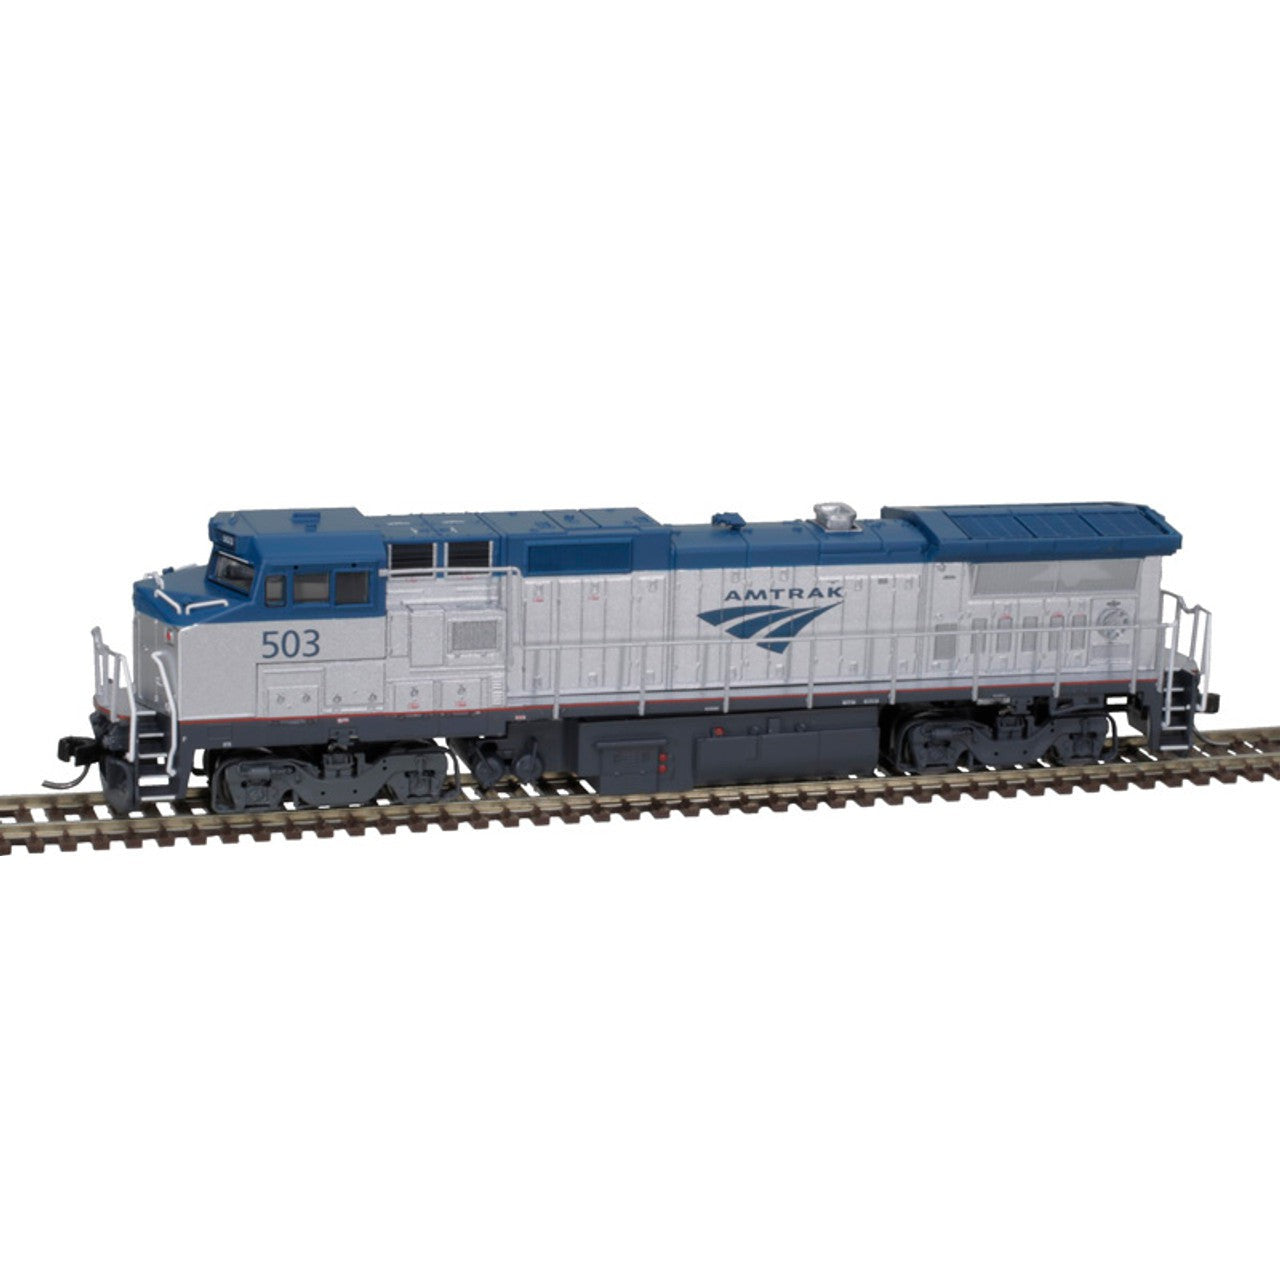 Review Tamiya Panel Line Accents on N Scale Model Trains, N Scale Model  Trains